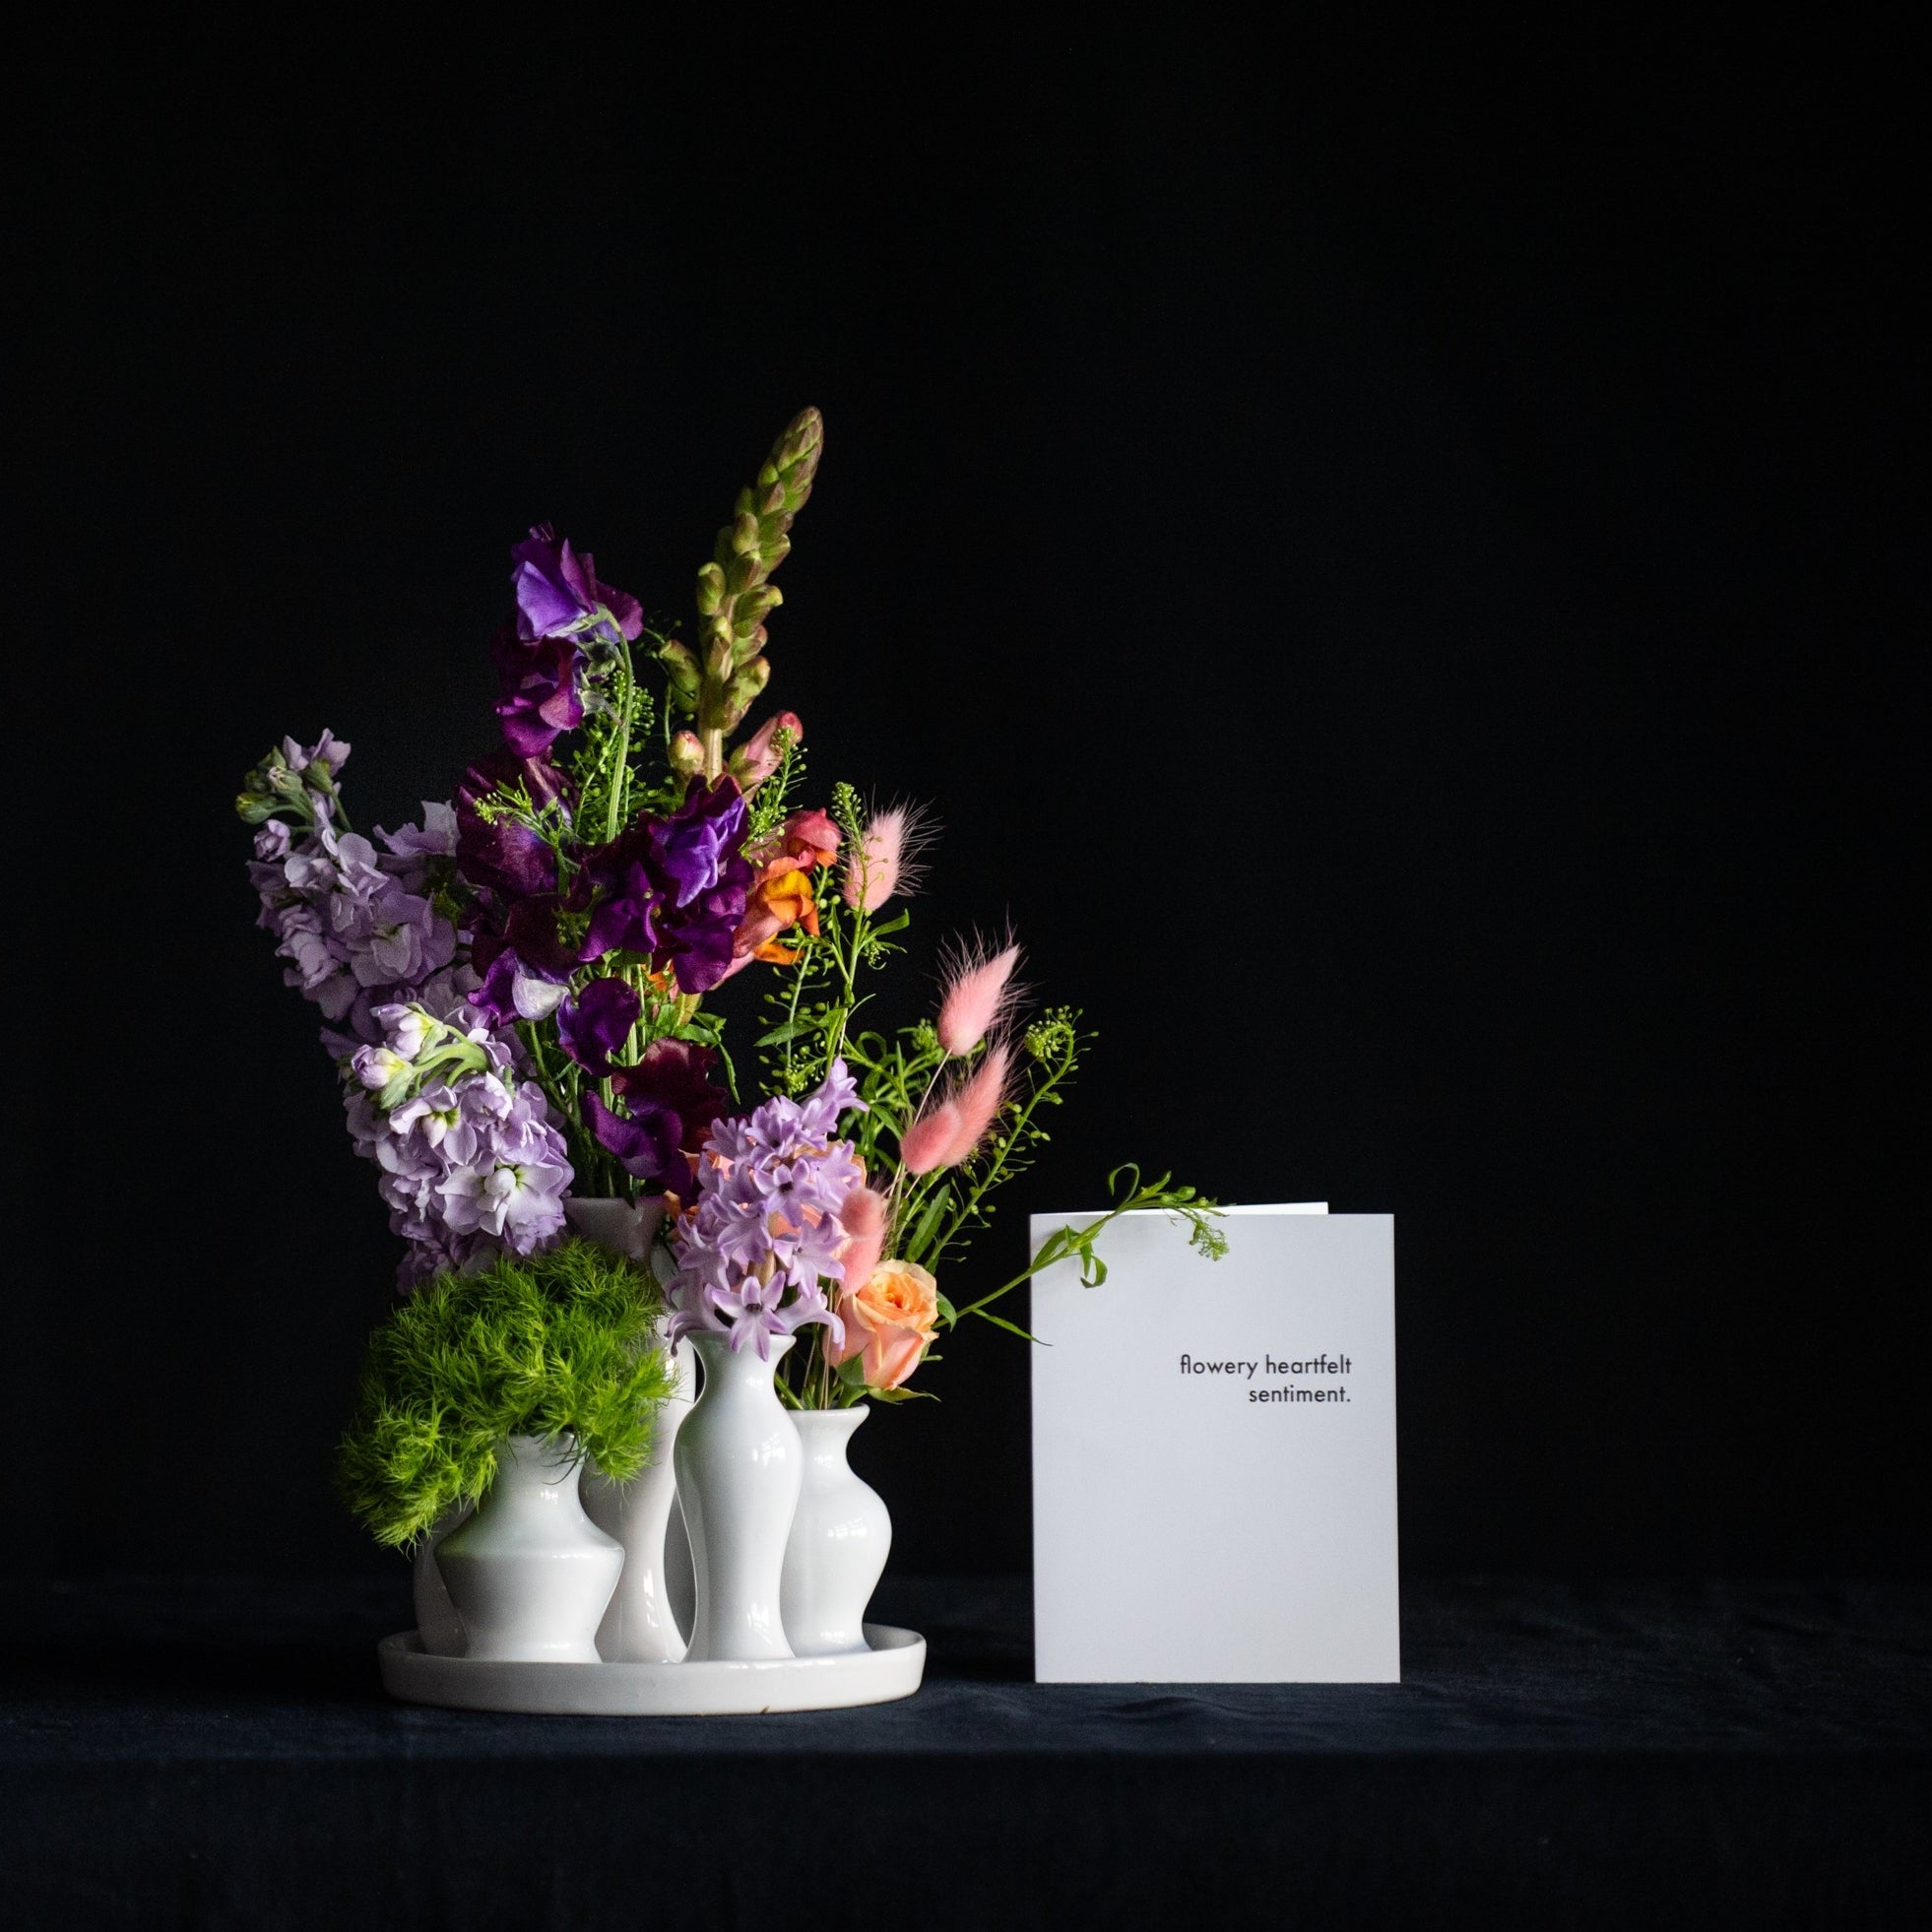 A collection of white ceramic bud vases filled with premium seasonal stems for any day